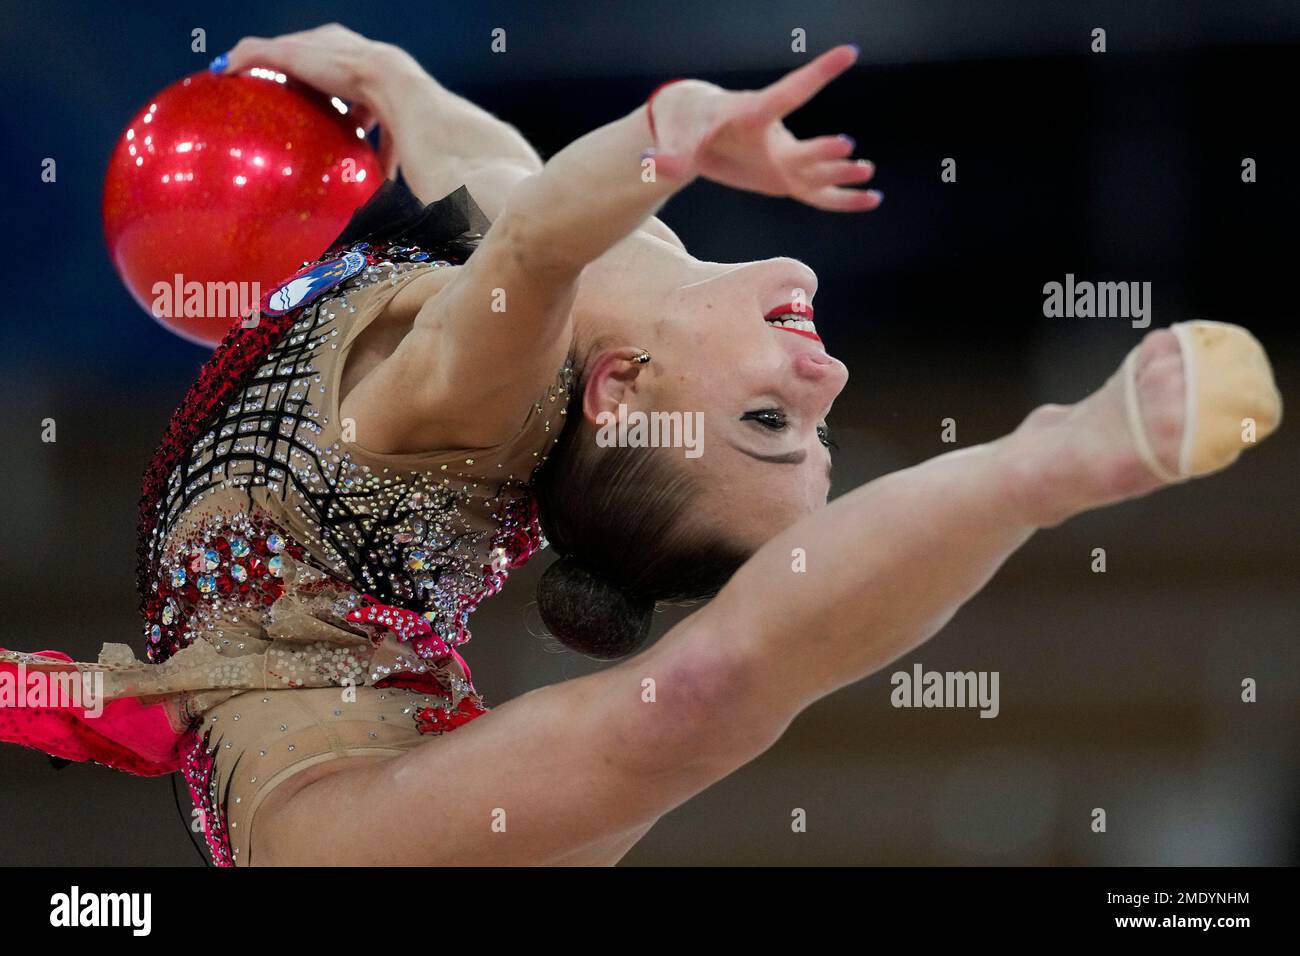 Ekaterina Vedeneeva, of Slovenia, performs during the rhythmic gymnastics individual all-around qualifier at the 2020 Summer Olympics, Friday, Aug